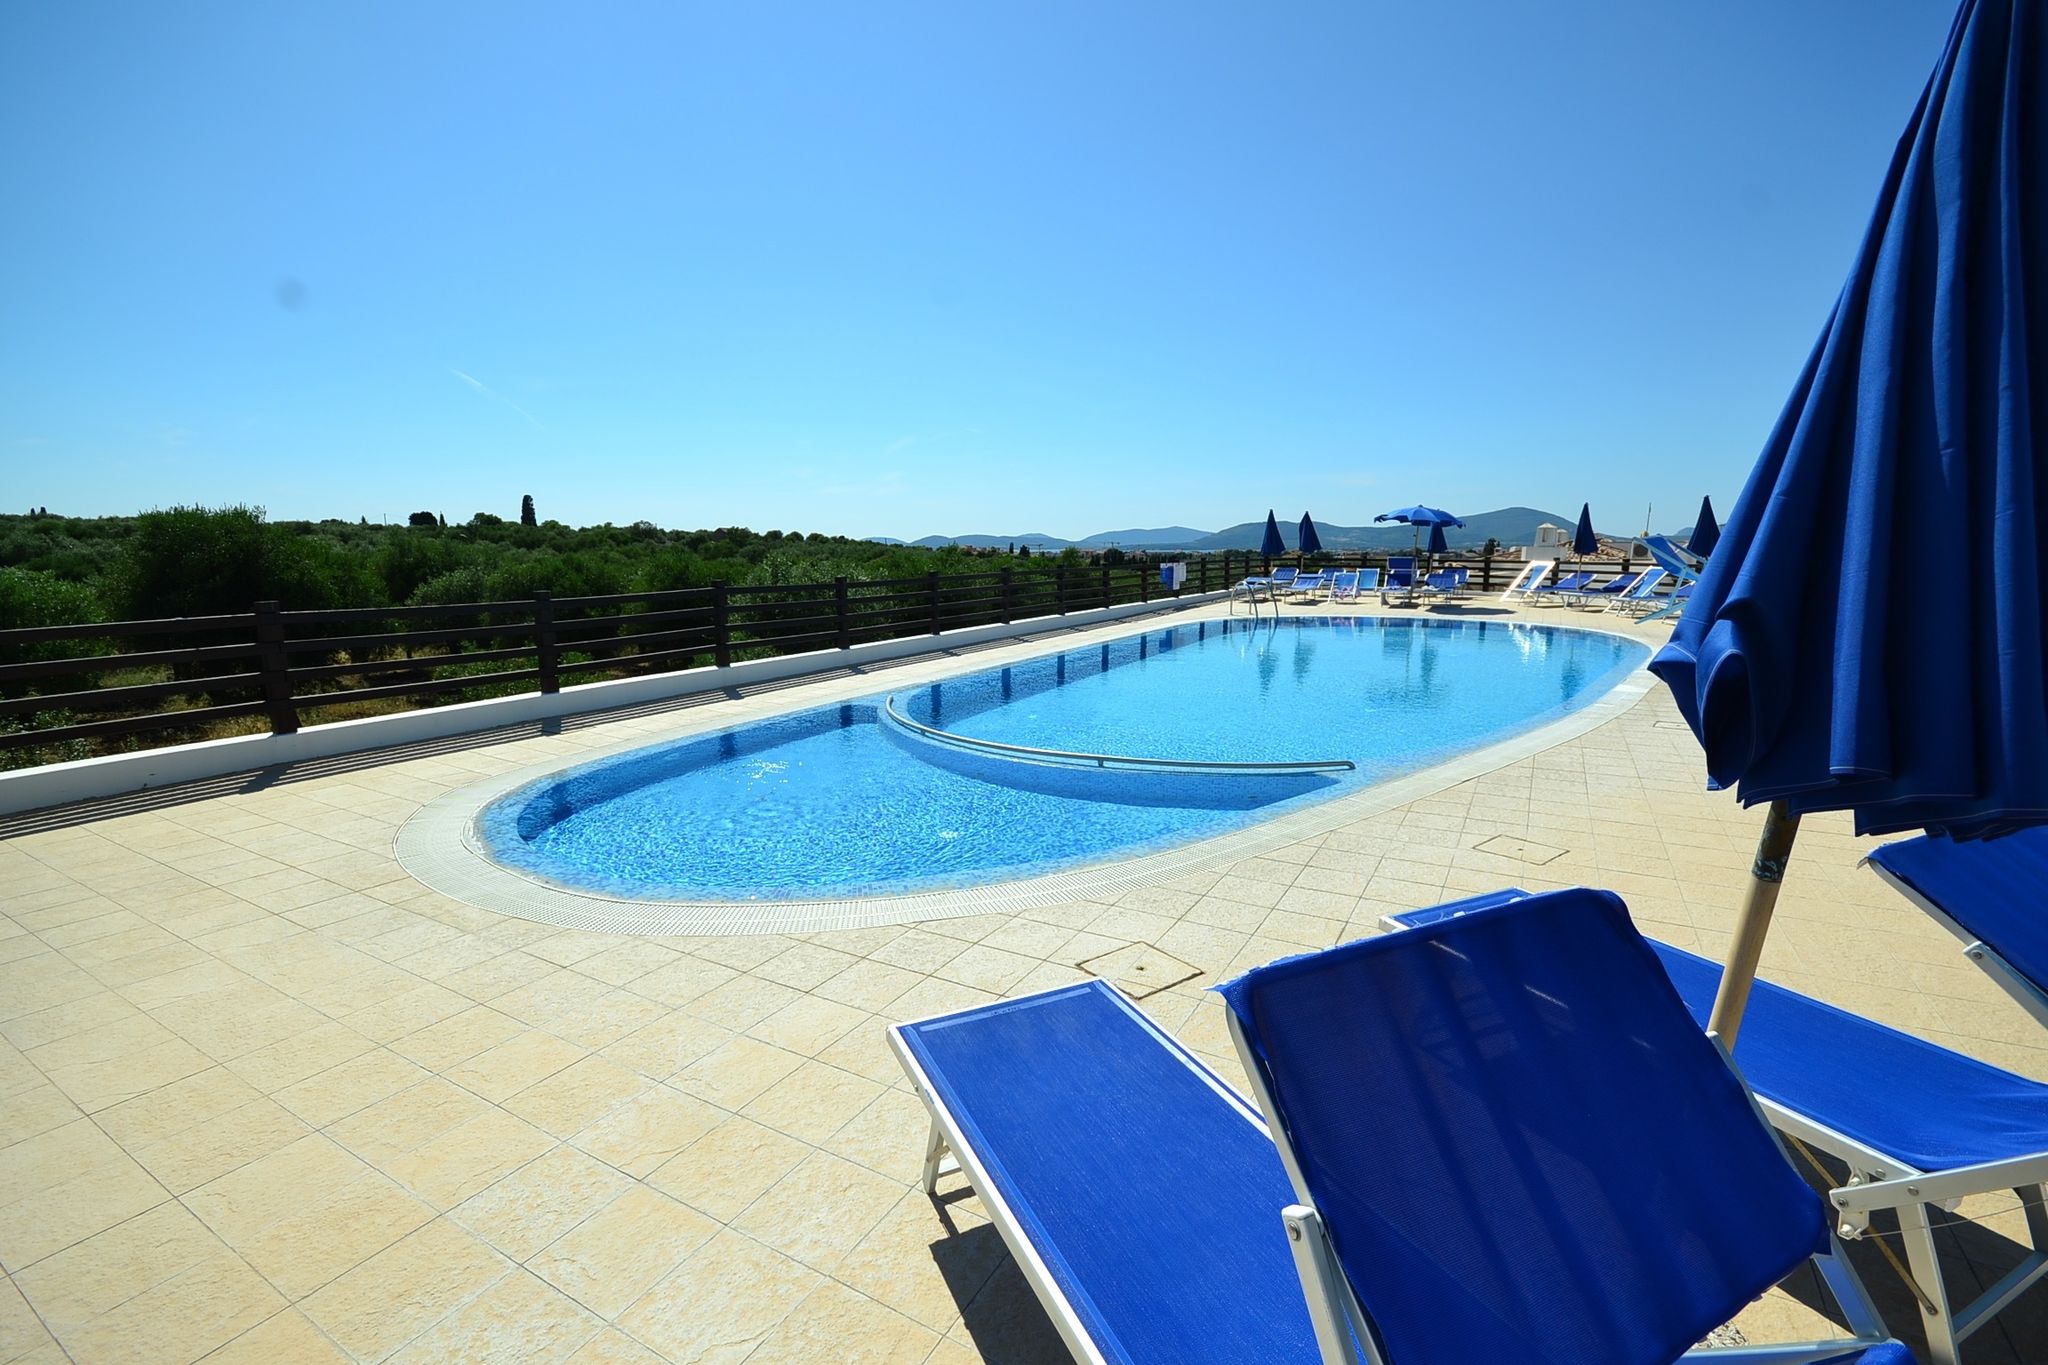 Very recently built complex with breathtaking views over the Gulf of Alghero